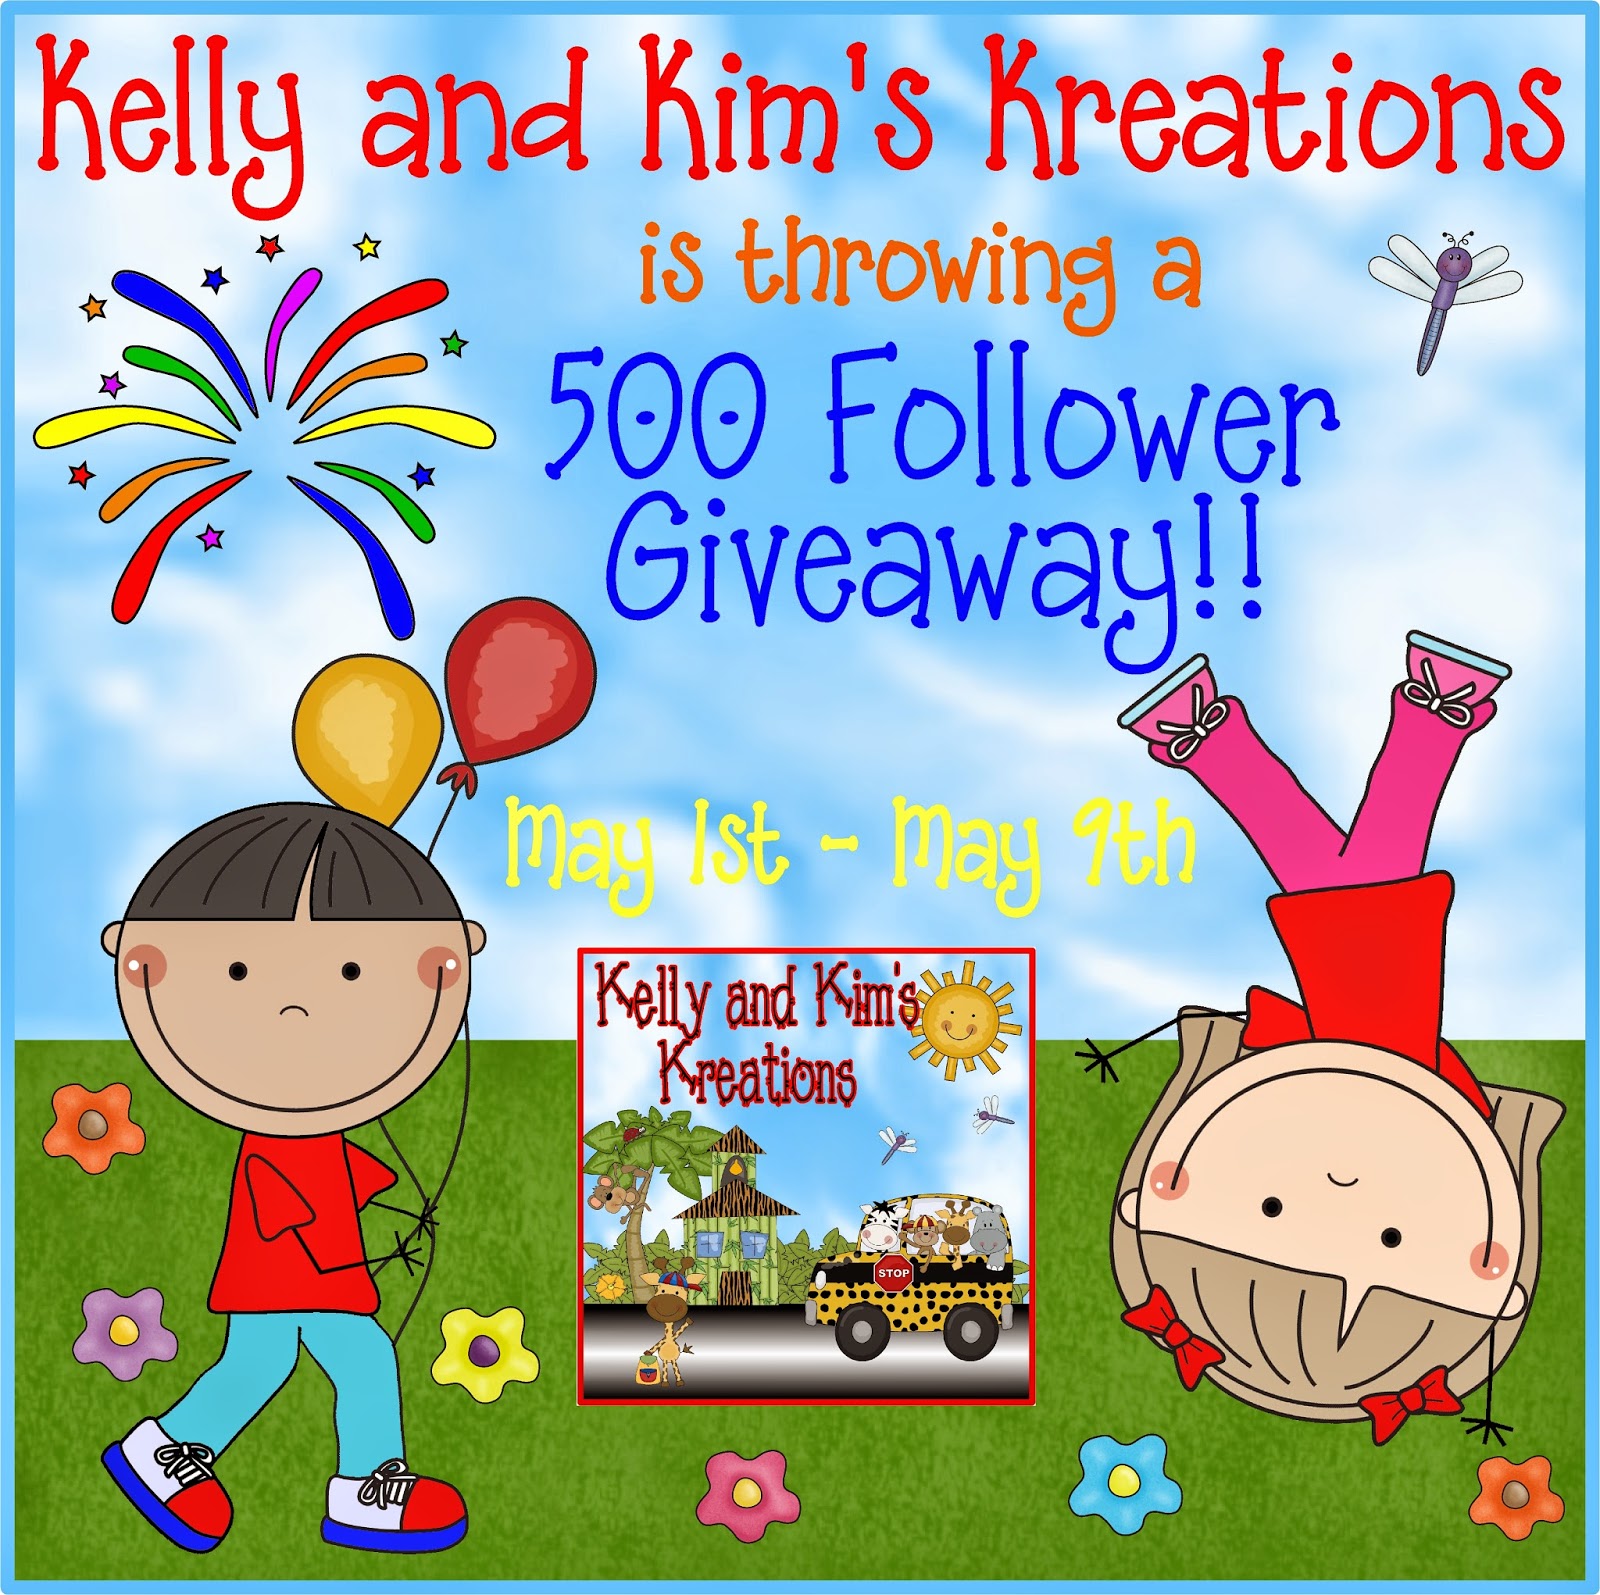 Kelly and Kim's Kindergarten Kreations: 500 Follower Giveaway!!